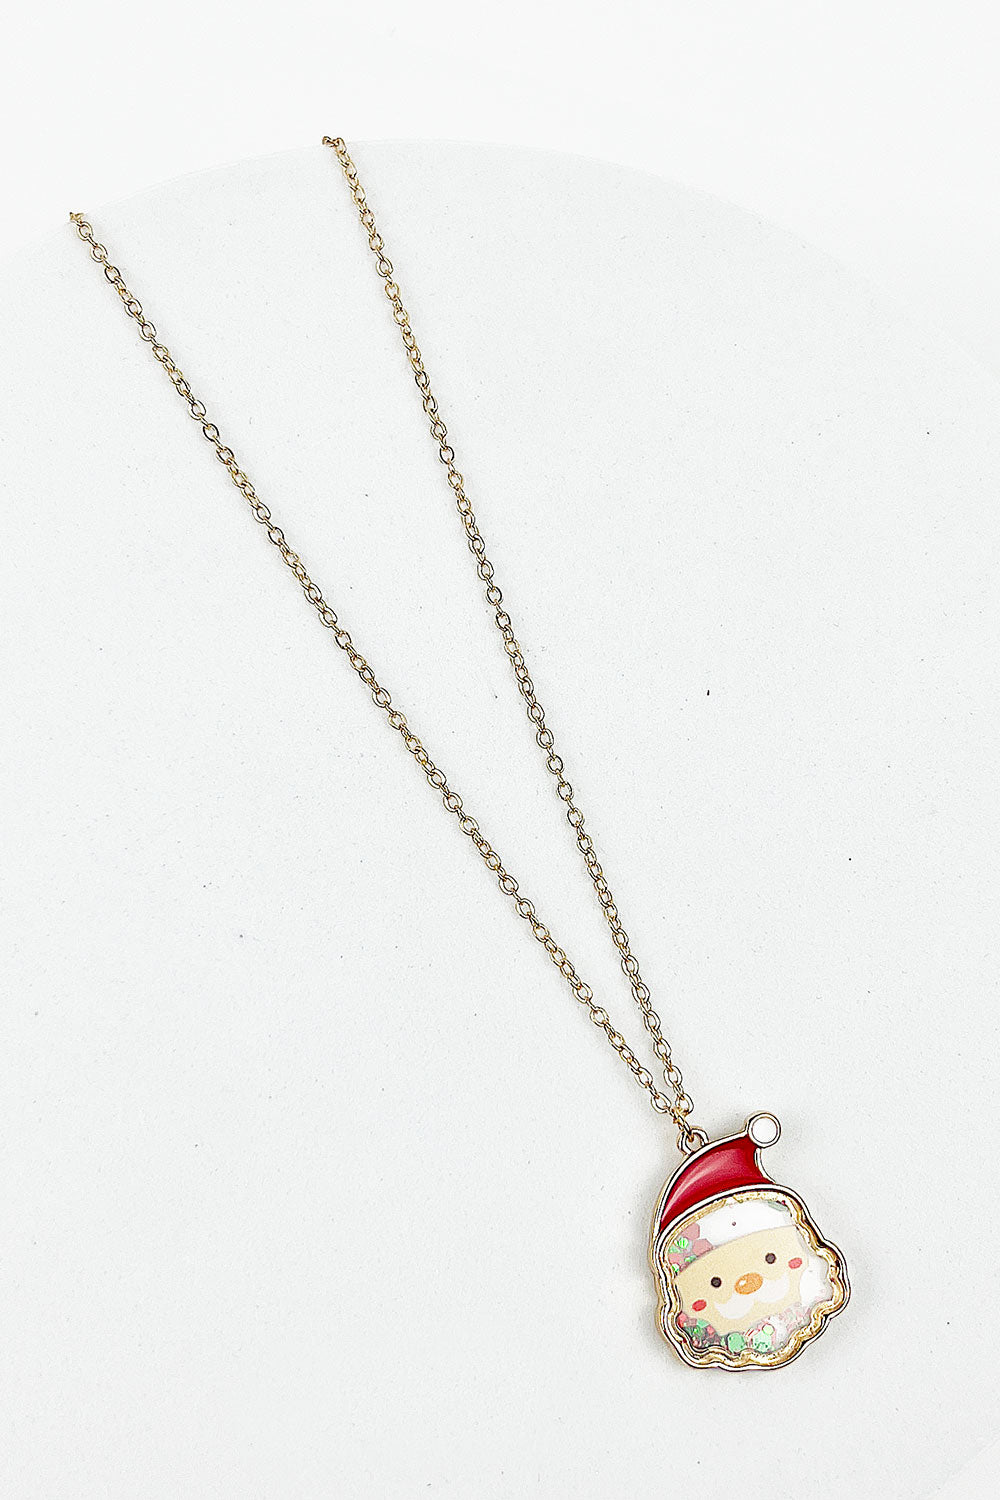 CHRISTMAS SANTA CLAUSE GLITTER SHAKER NECKLACE